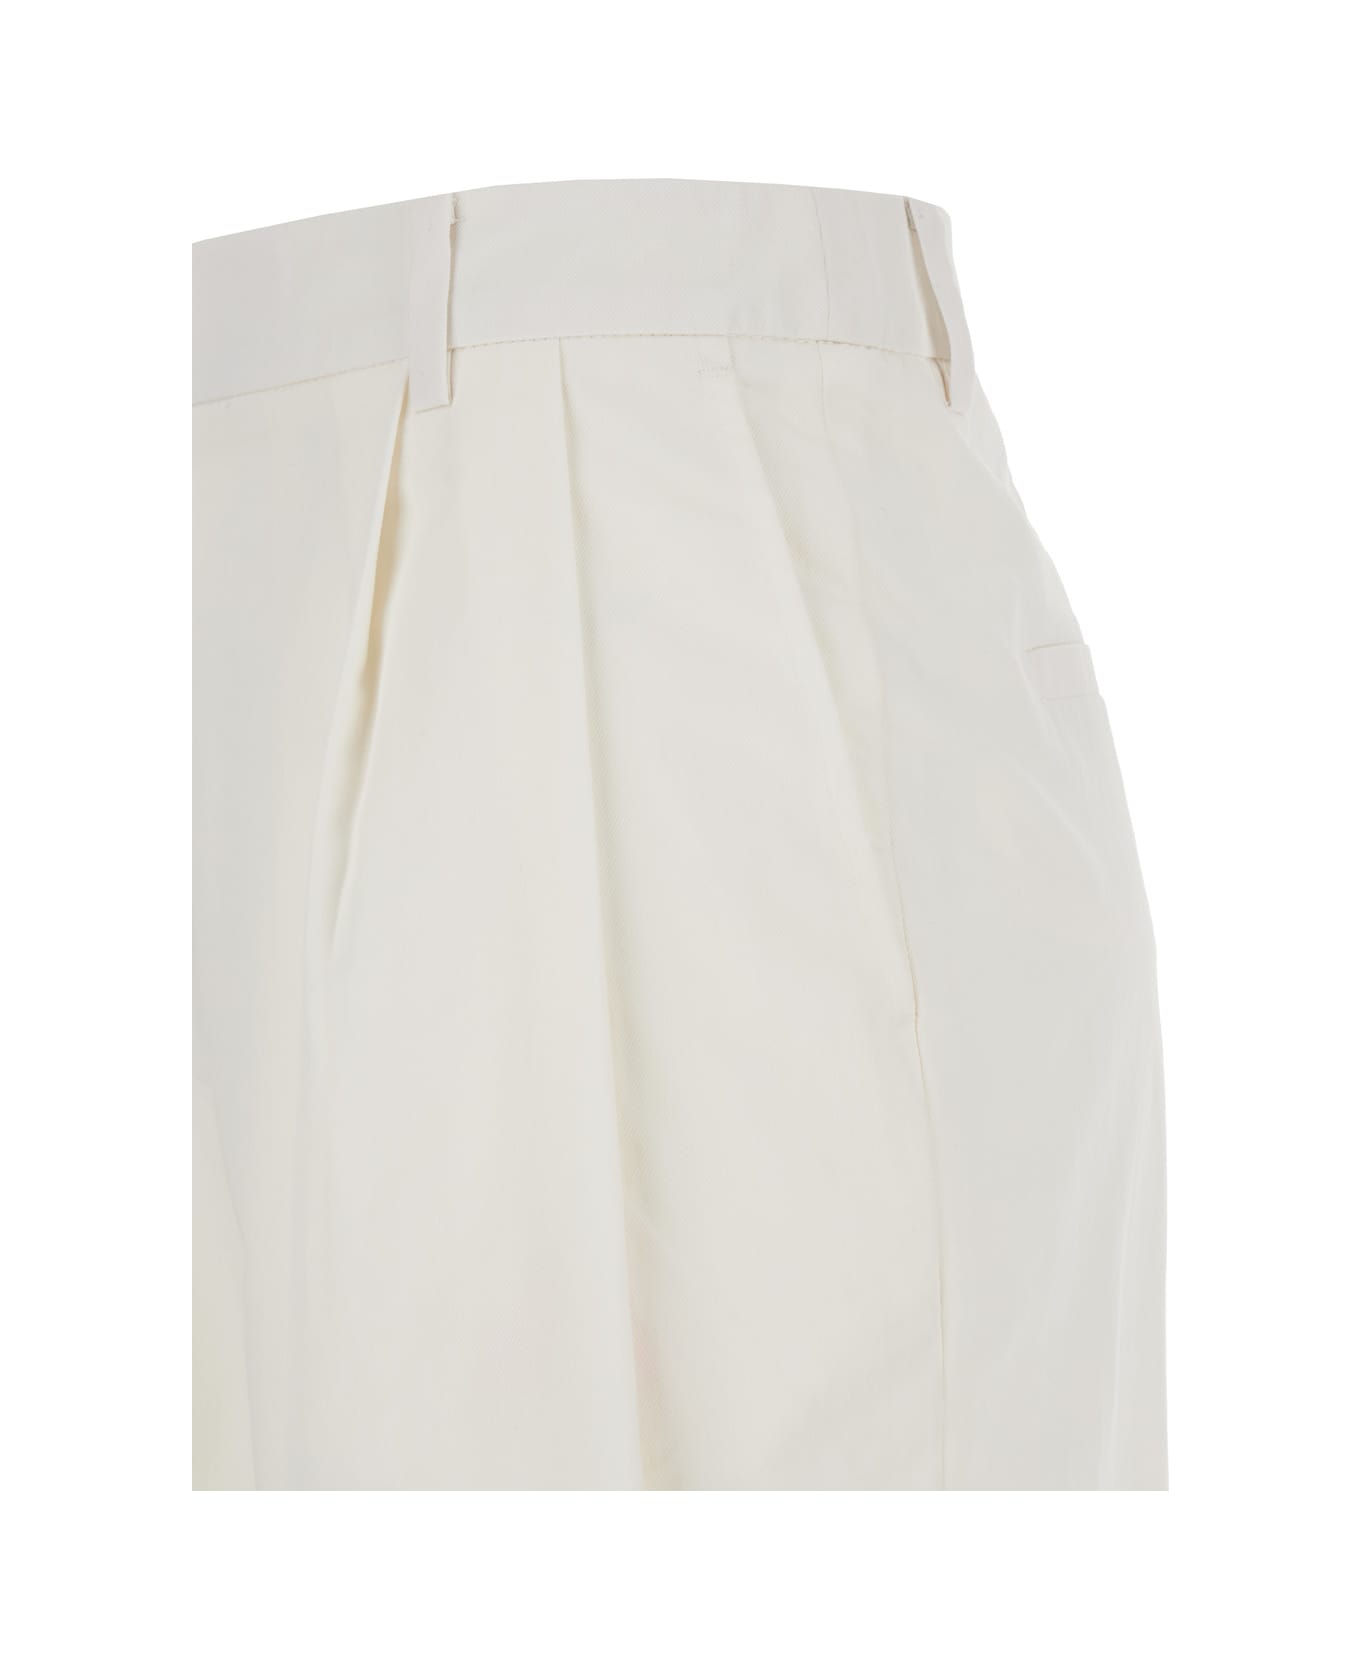 Dunst White Wide Pants In Cotton Blend Woman - White